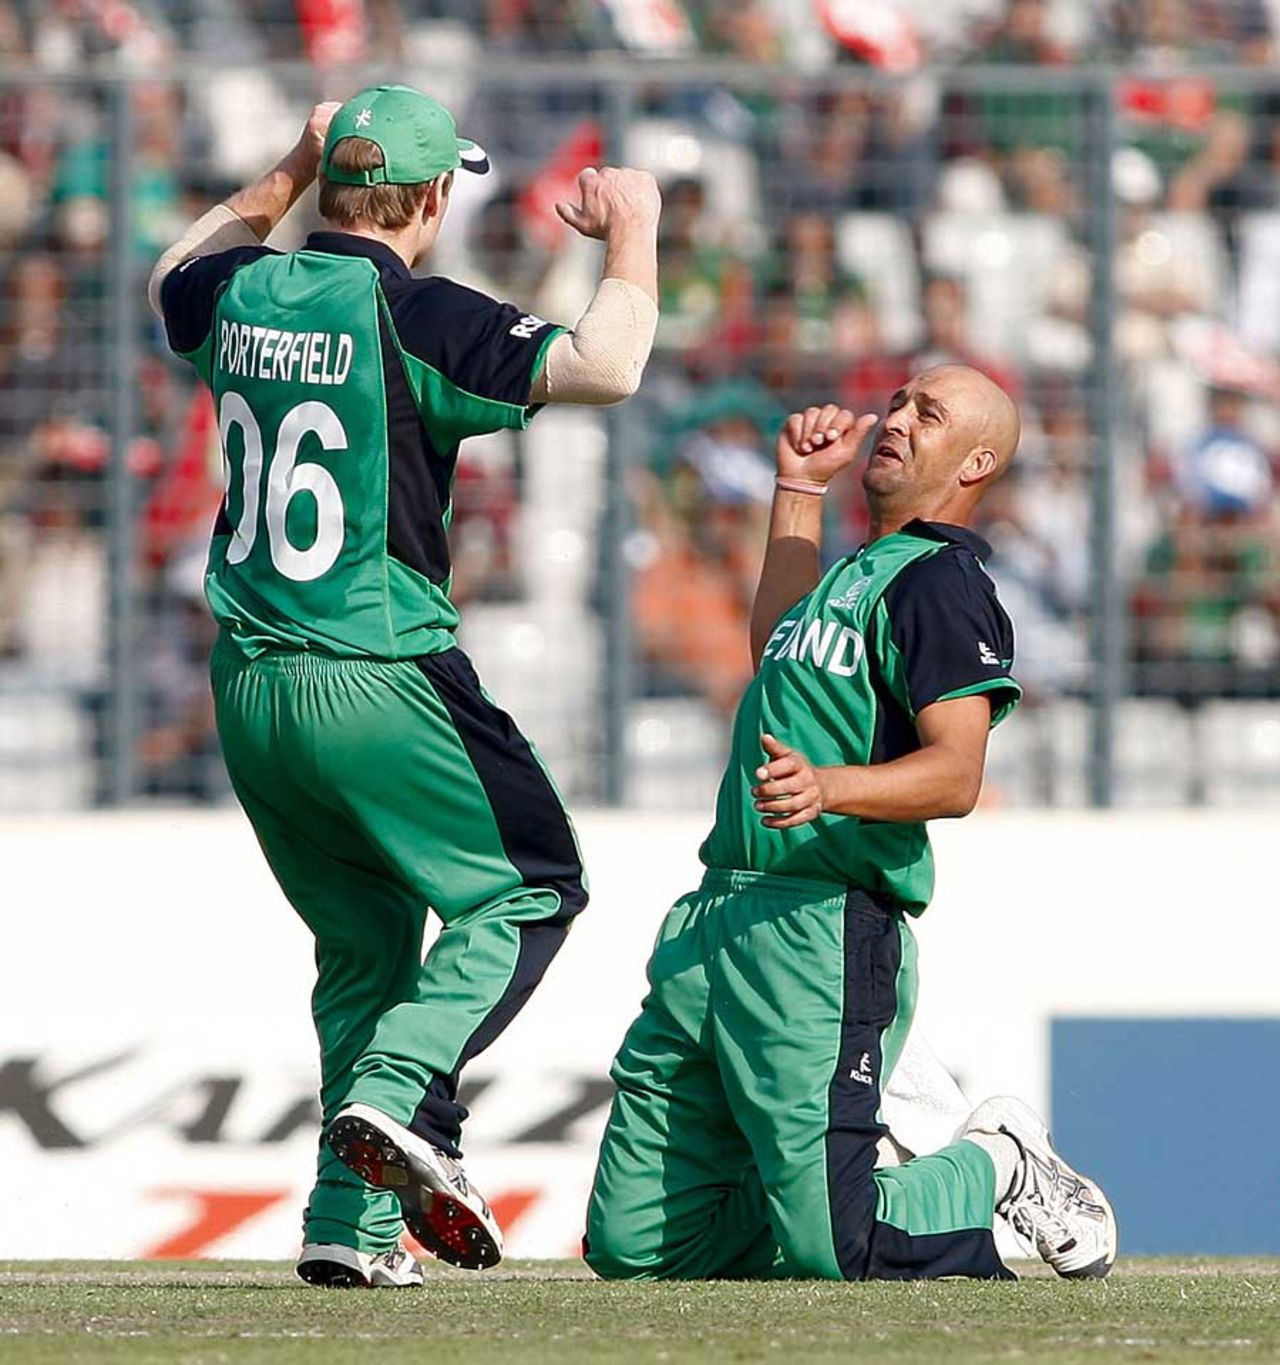 Andre Botha claimed his second scalp when he removed Shakib Al Hasan, Bangladesh v Ireland, World Cup 2011, Mirpur, February 25, 2010
